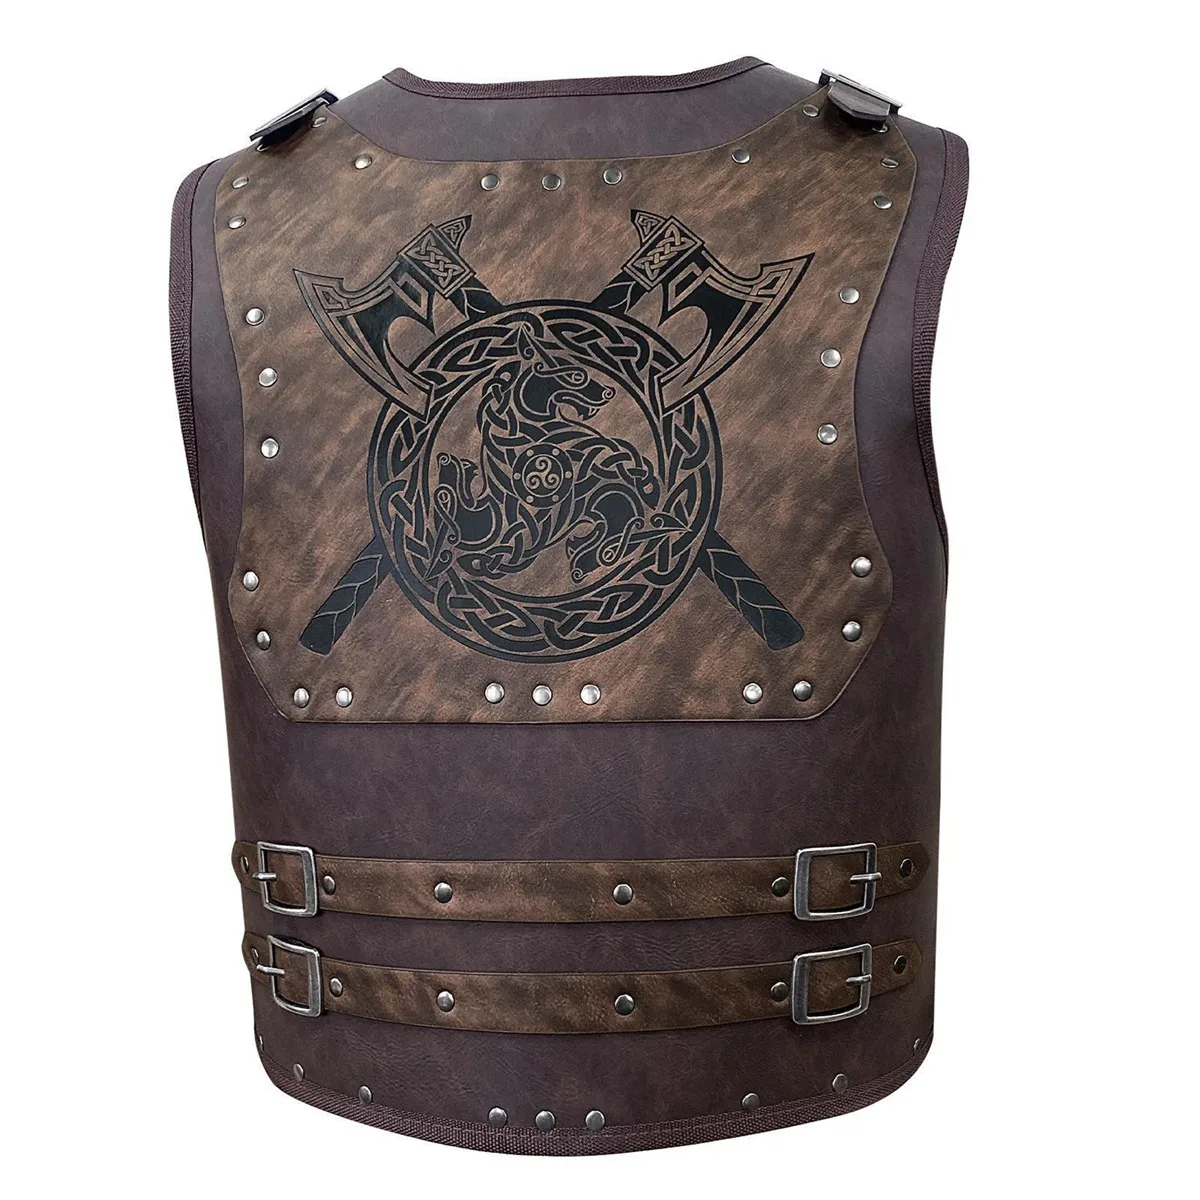 

Warrior PU Leather Chest Armor,Retro Leather Body Armor,for LARP Cosplay Costume Accessories,Ax